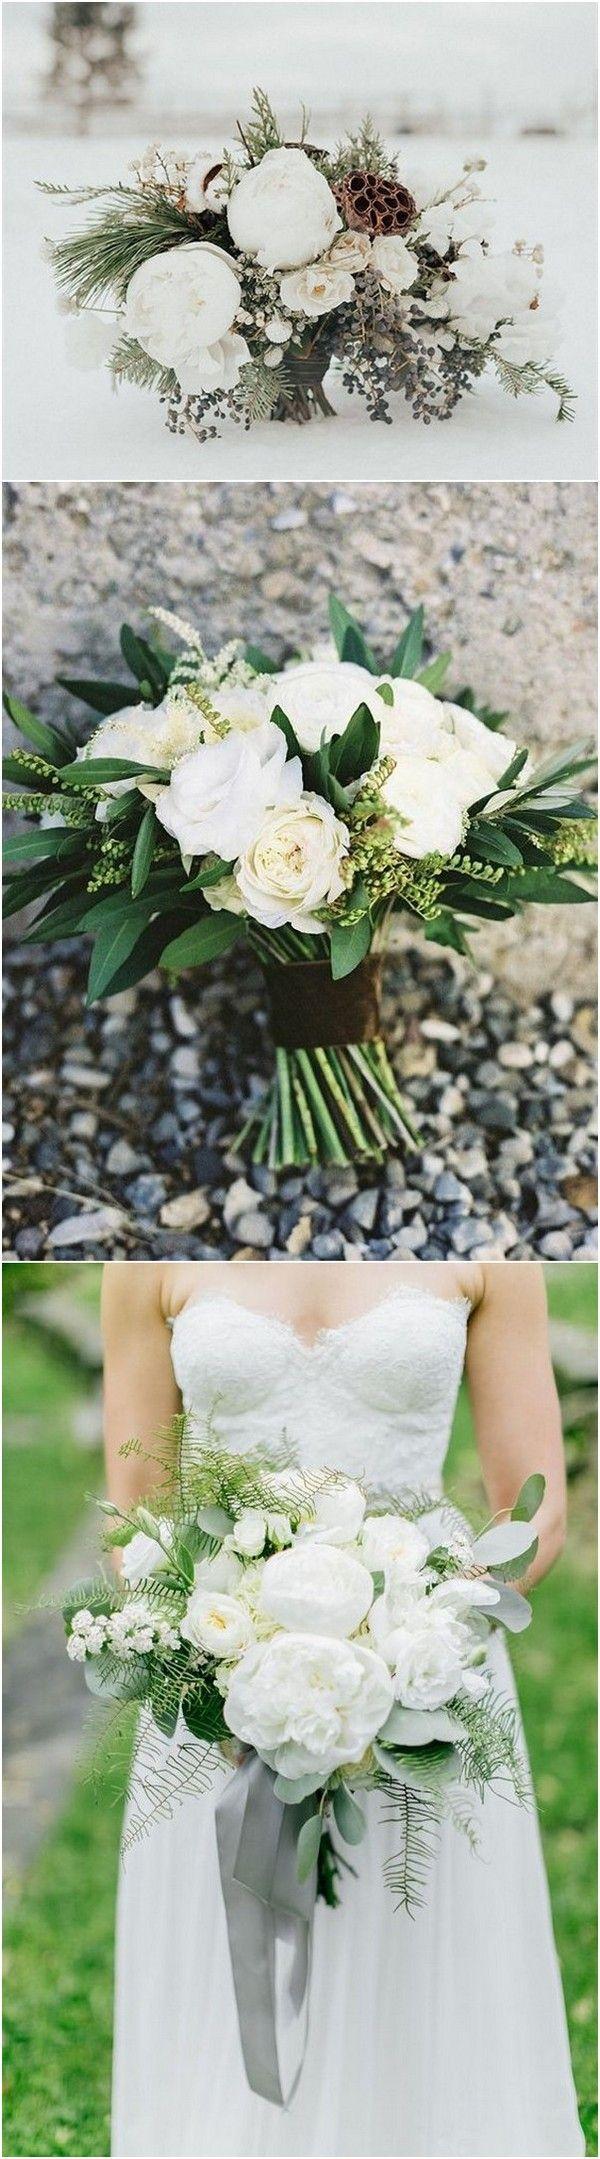 Wedding - 18 Charming Neutral Wedding Bouquets For 2018 Trends - Page 2 Of 2